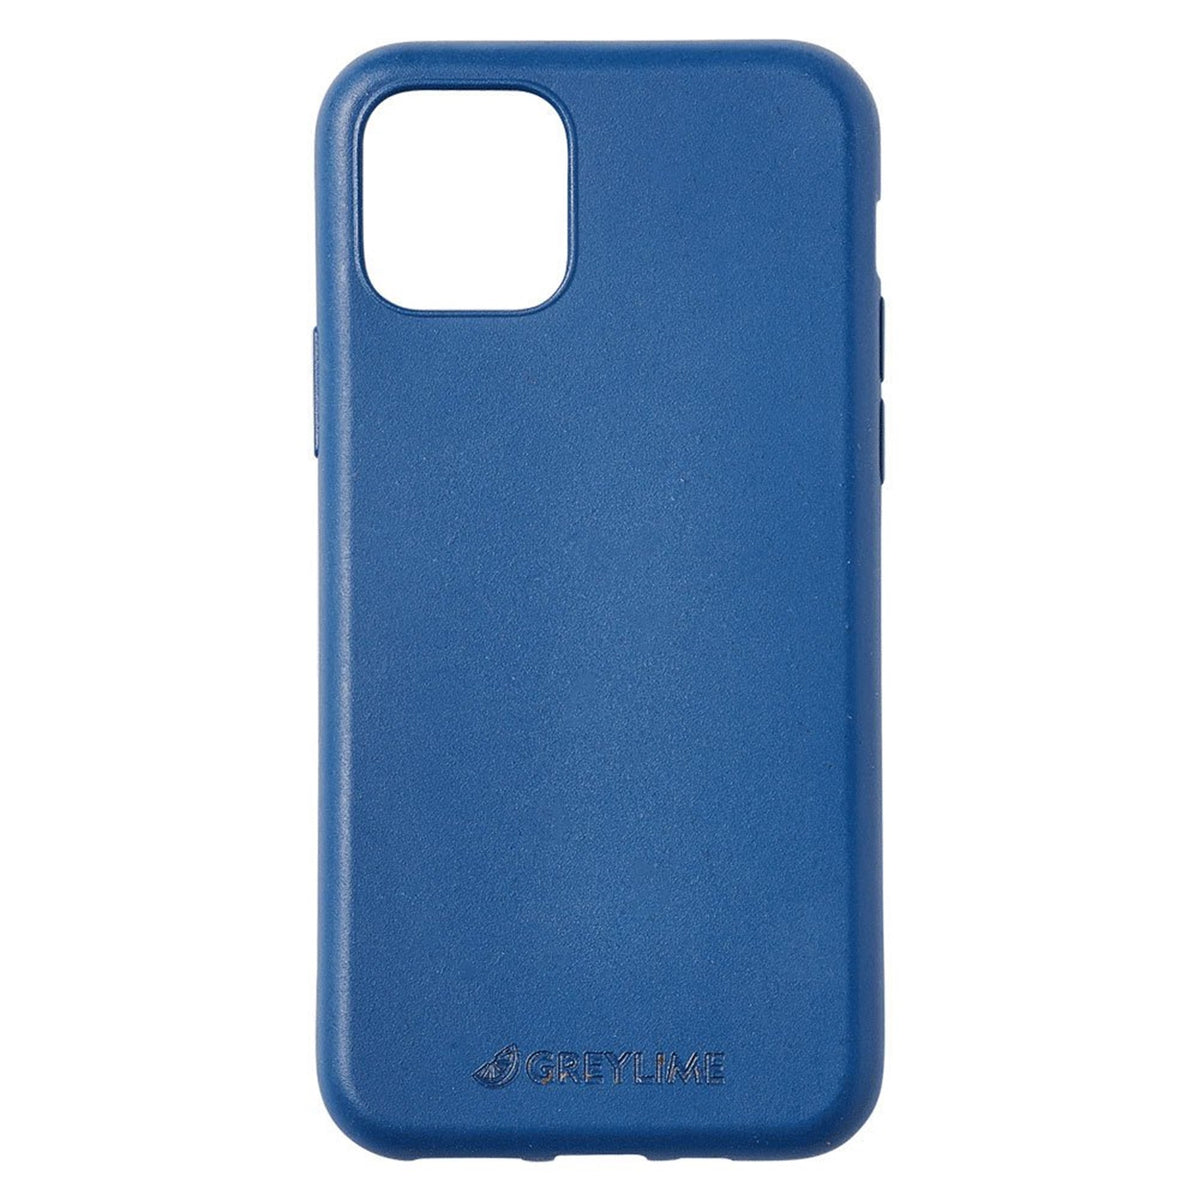 GreyLime-iPhone-11-Pro-biodegradable-cover-Navy-Blue-COIP11P03-V4.jpg